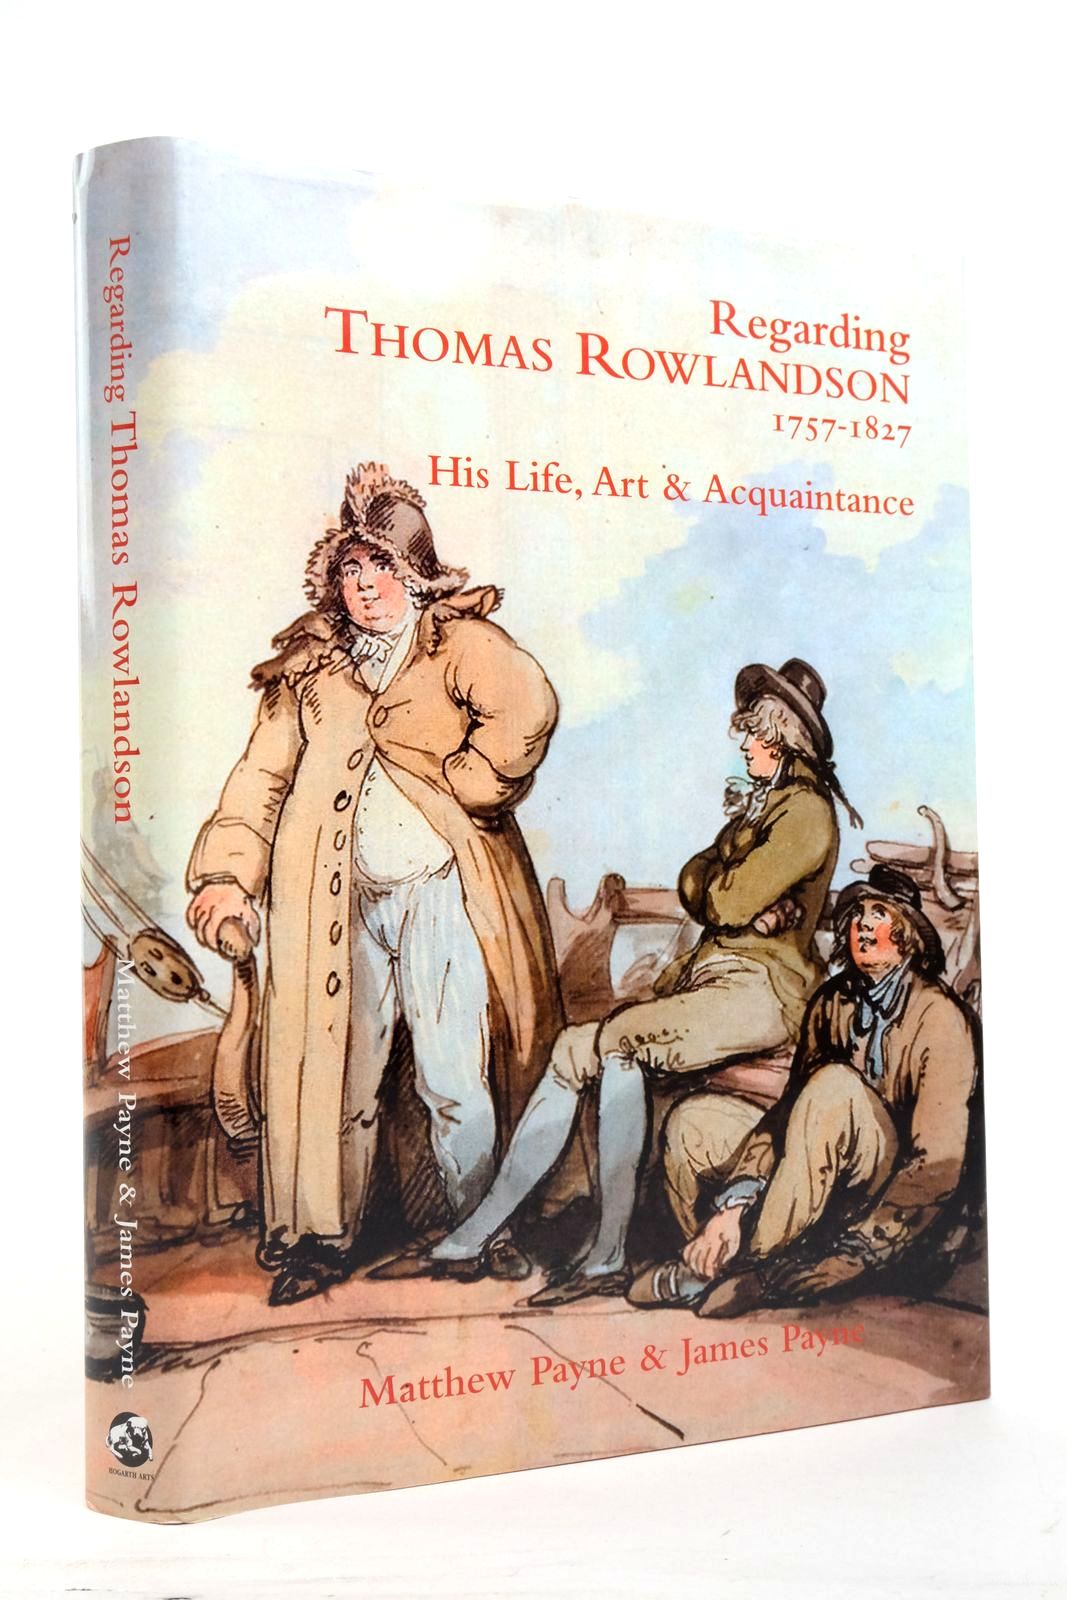 Photo of REGARDING THOMAS ROWLANDSON 1757-1827 written by Payne, Matthew Payne, James published by Hogarth Arts (STOCK CODE: 2136770)  for sale by Stella & Rose's Books